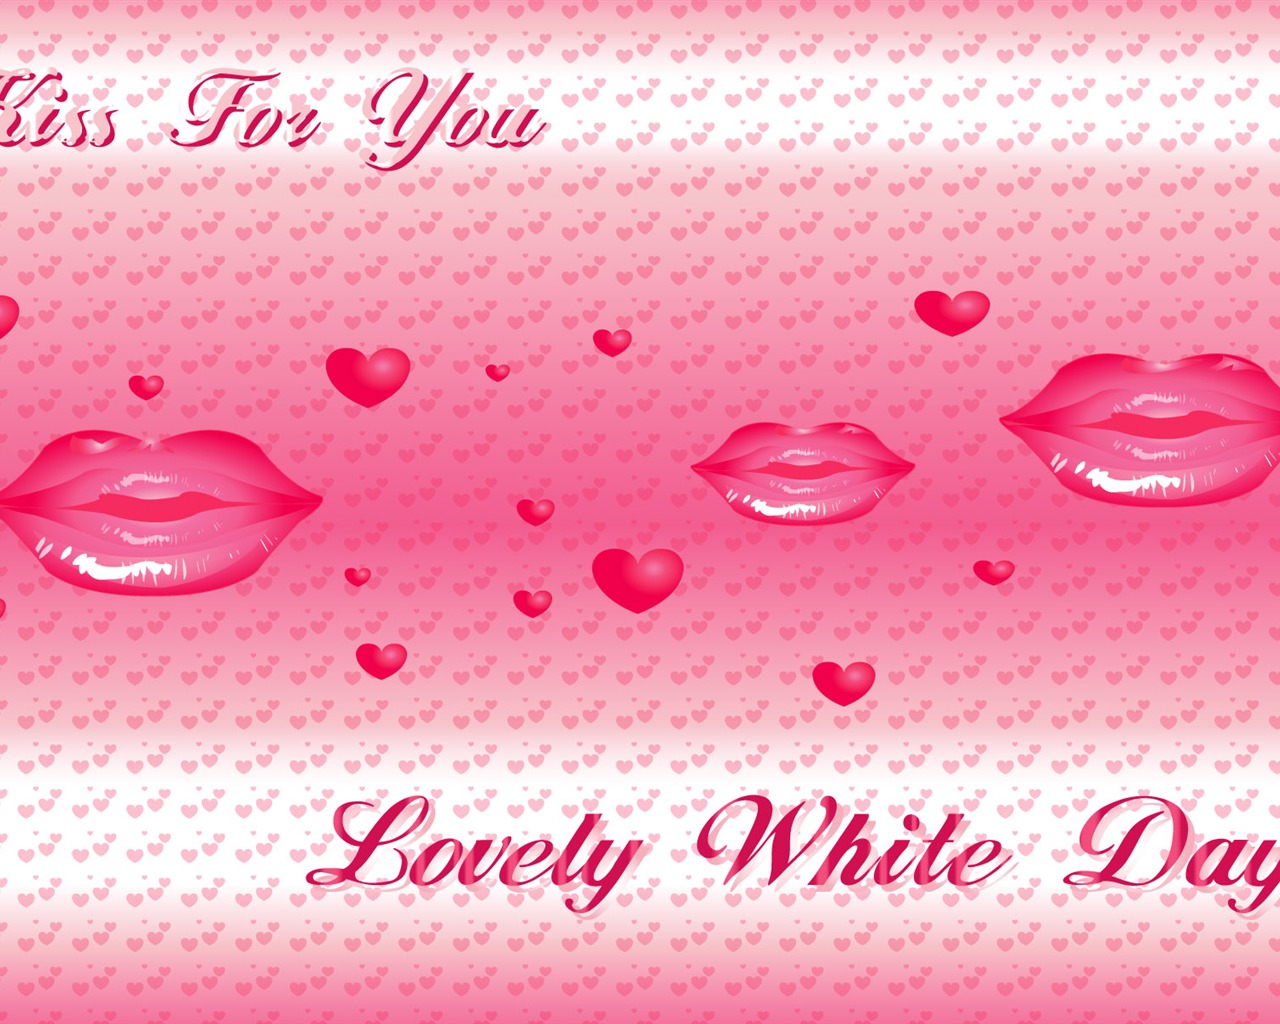 Valentine's Day Theme Wallpapers (1) #4 - 1280x1024